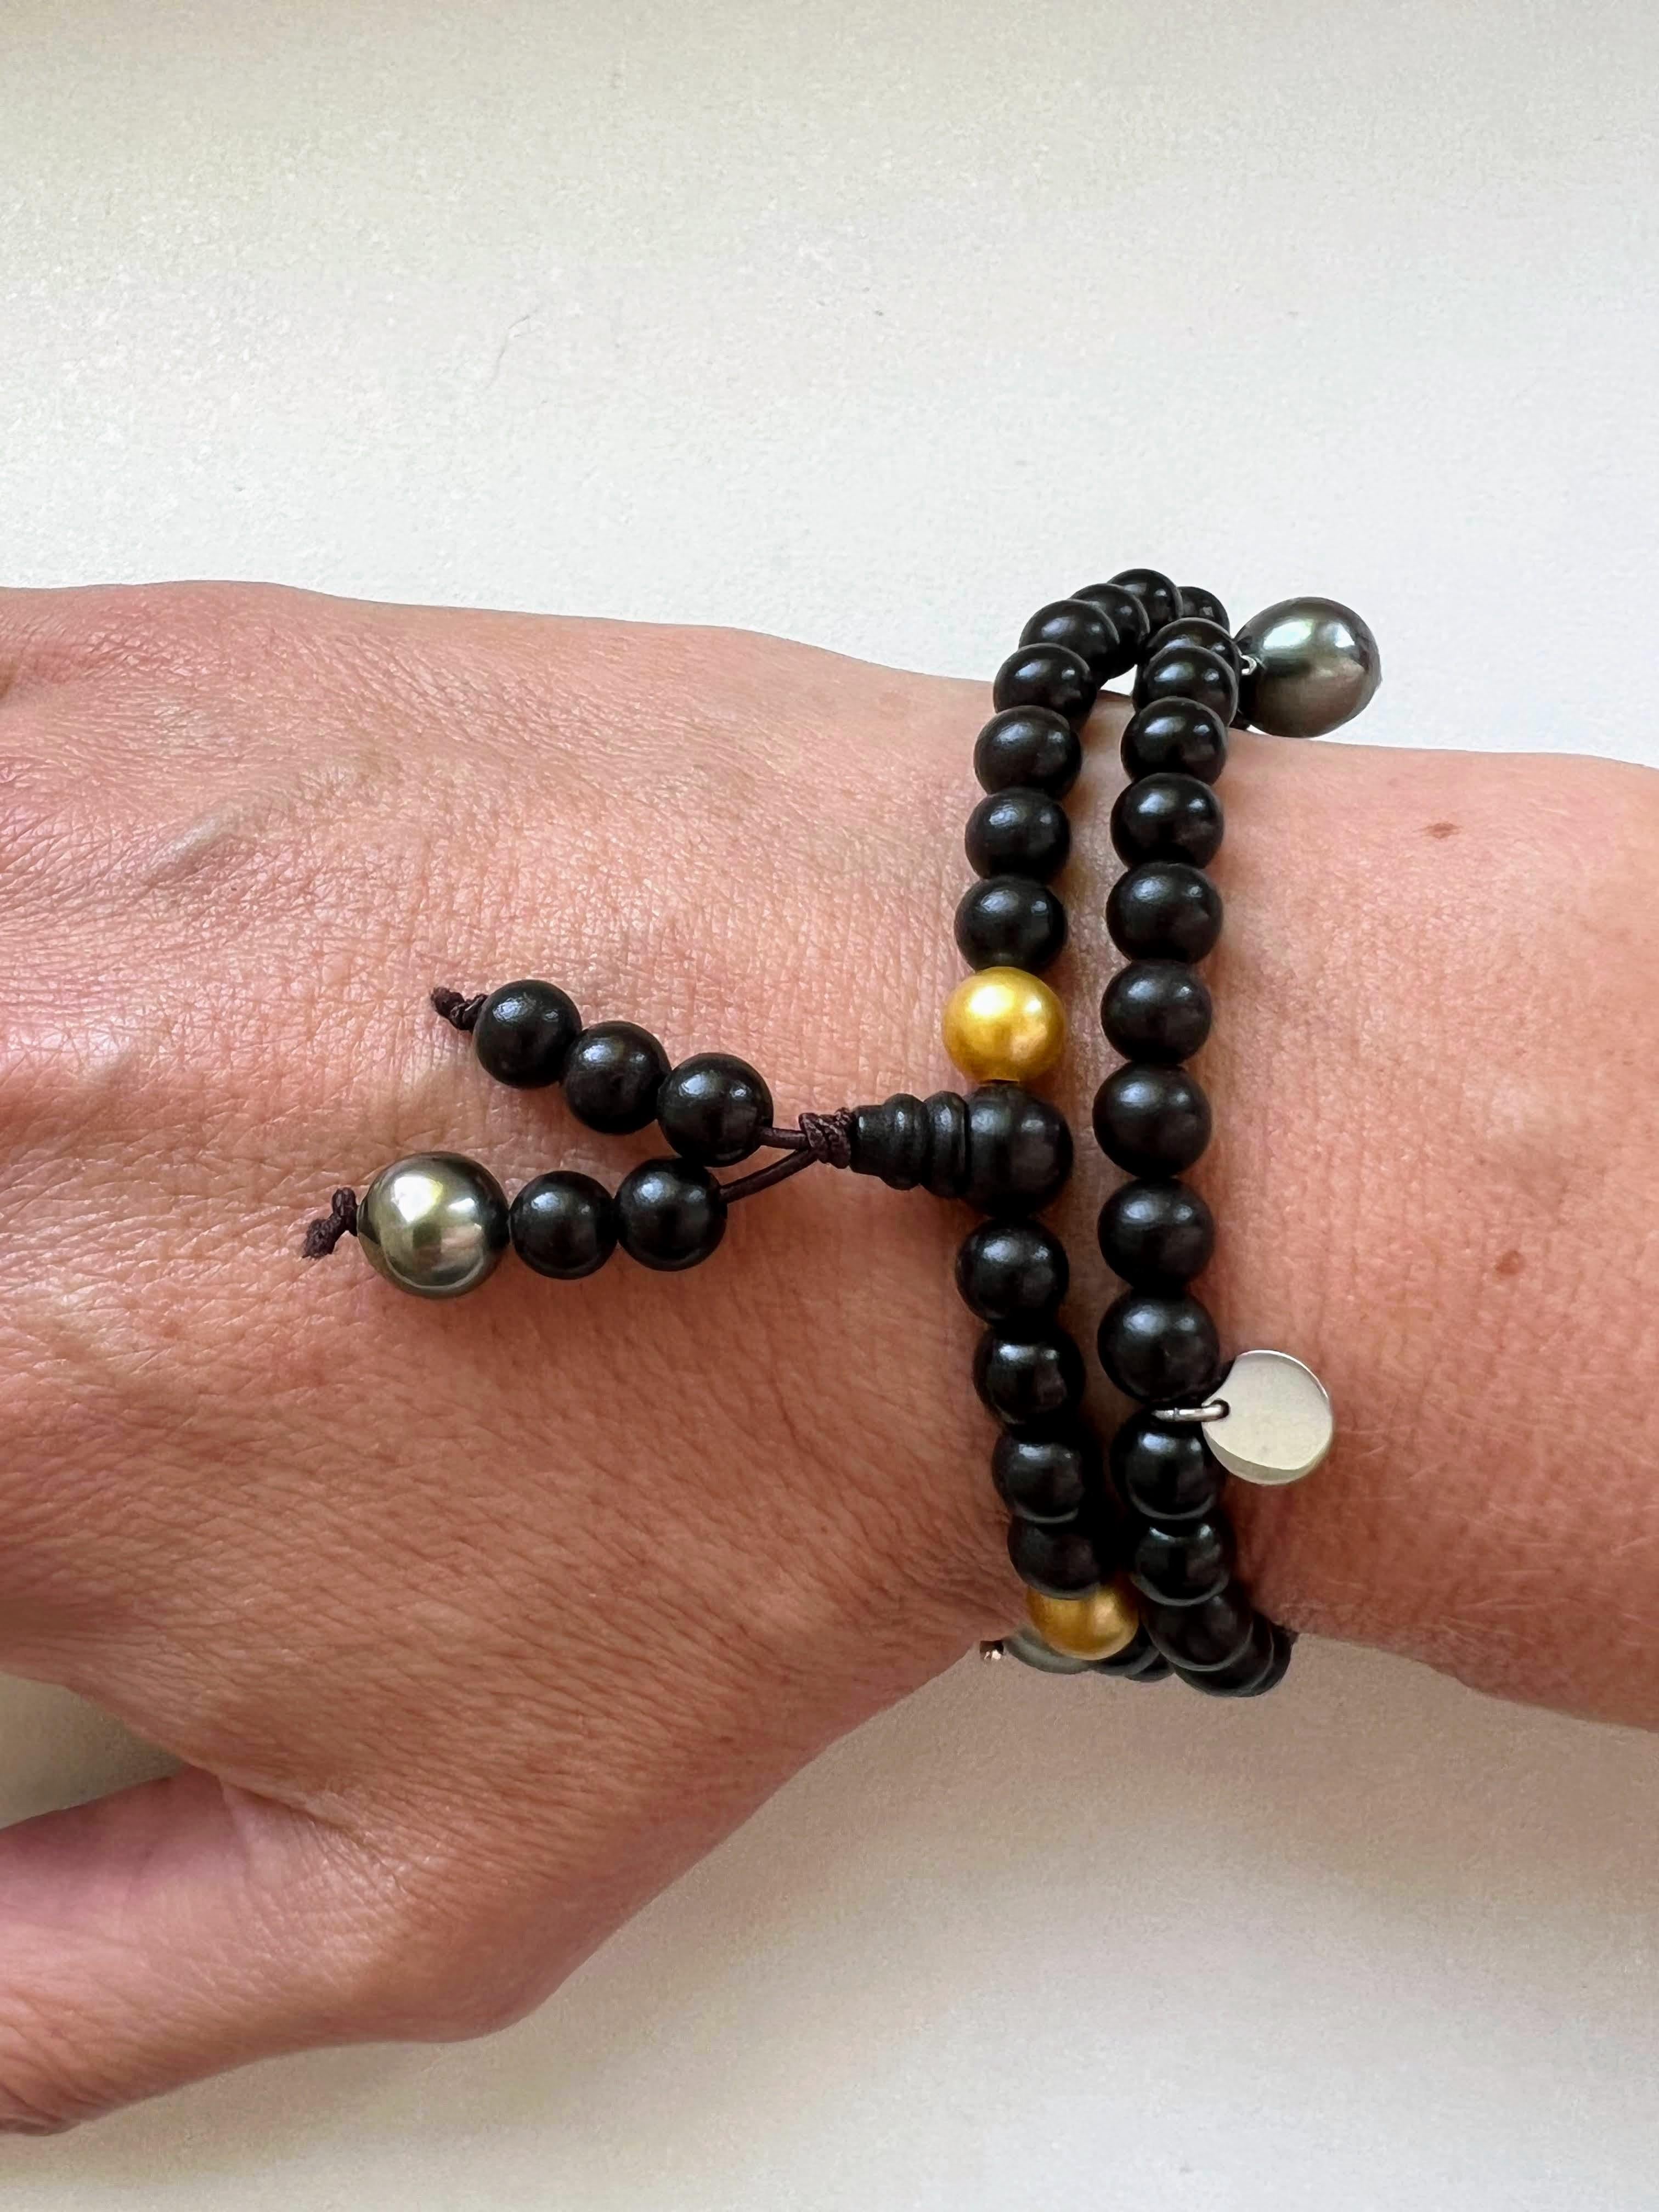 This jewelry piece is inspired by the Buddhist prayer bracelets. It can be worn as a short necklace or wrapped around the wrist. It is captivating with its intriguing little and rare golden pearls. the dangling Tahiti pearls in baroque shape add a